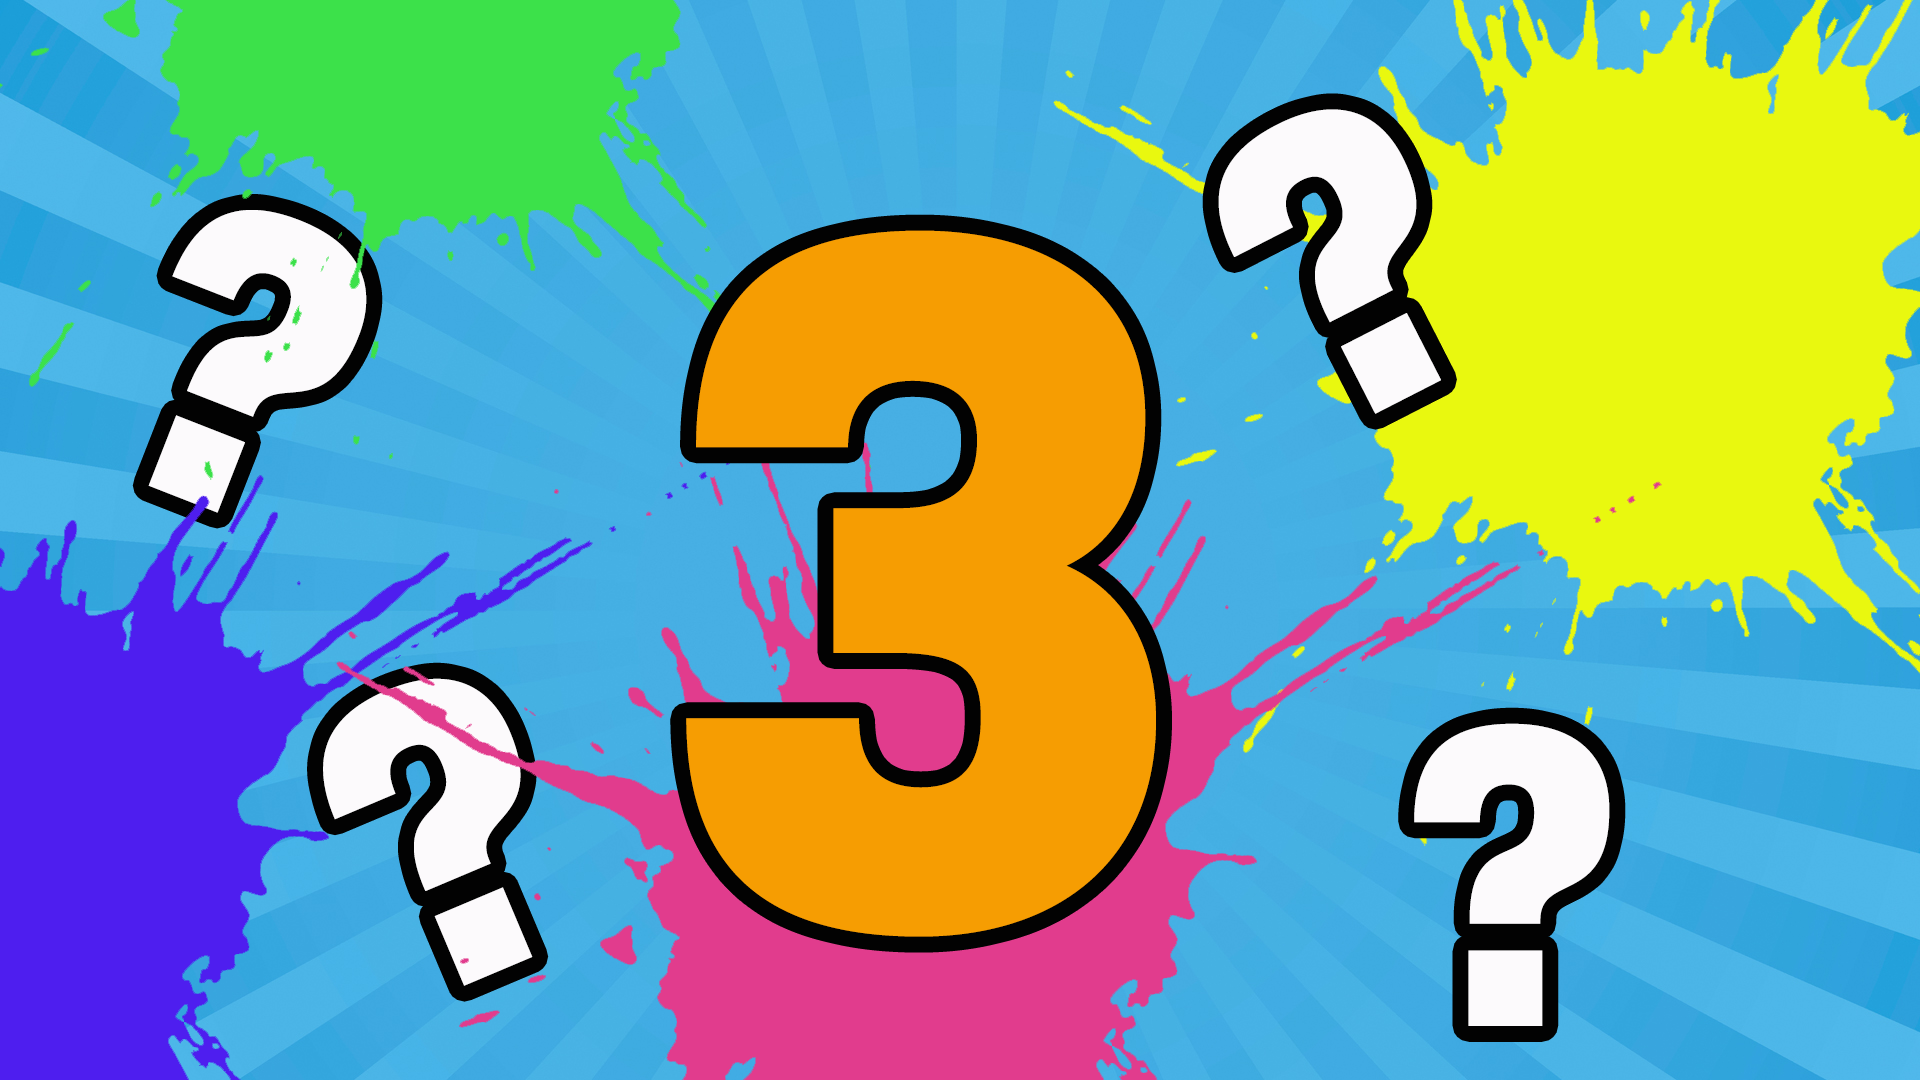 3 with question marks and splats on blue background 